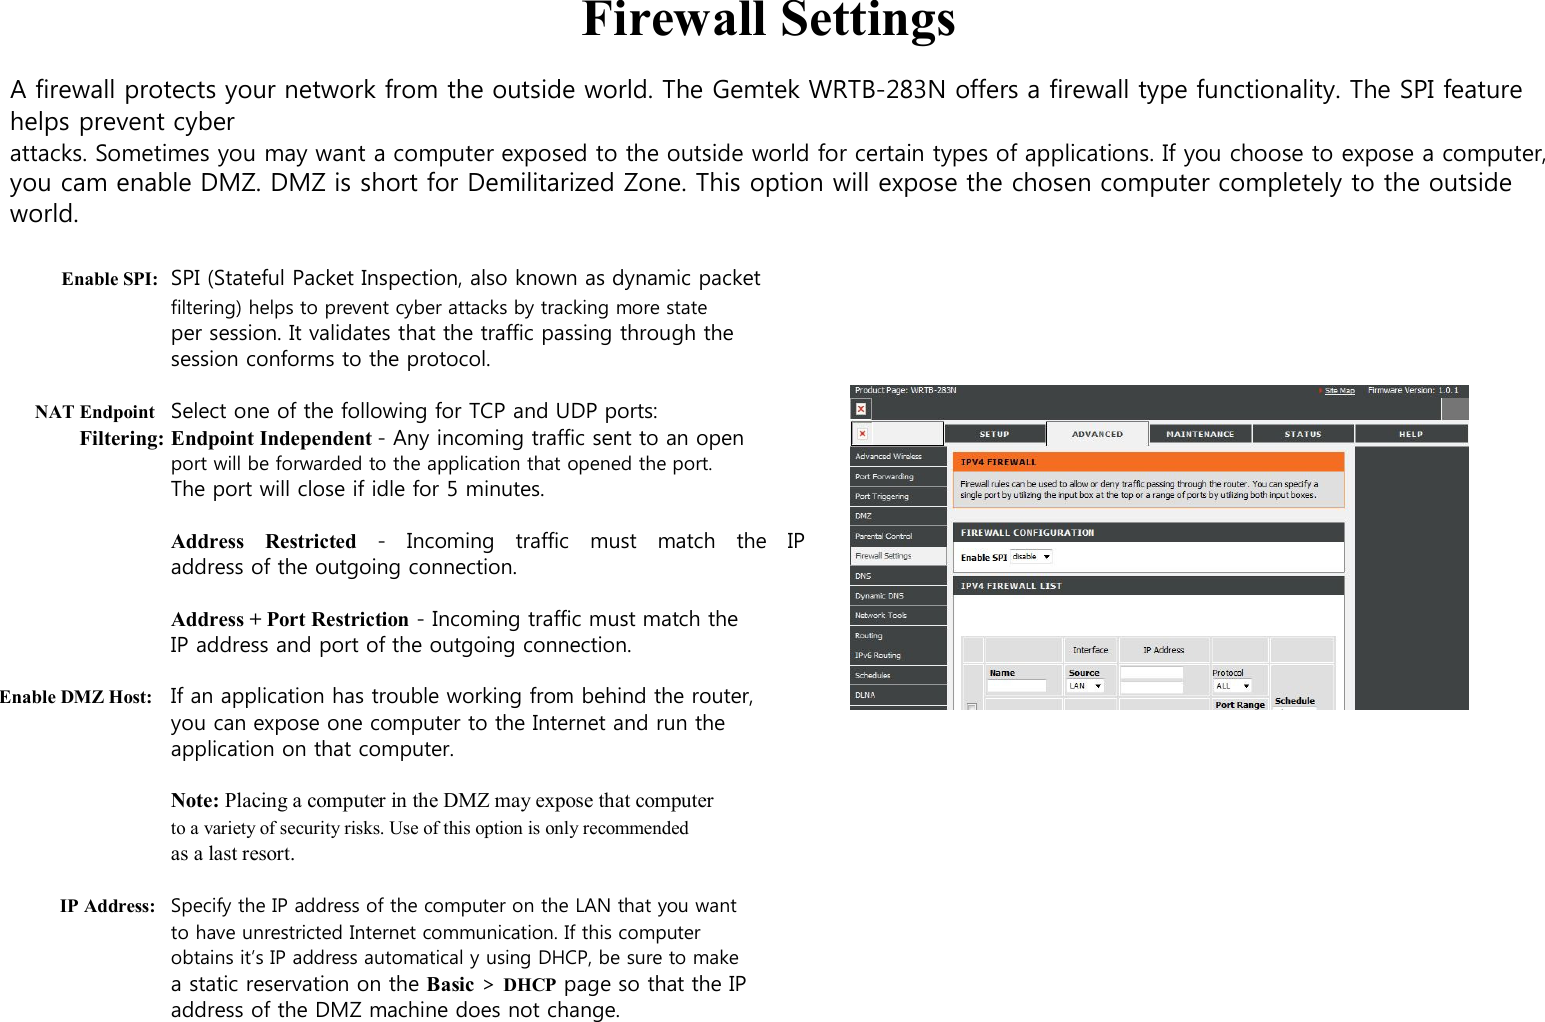  Firewall Settings  A firewall protects your network from the outside world. The Gemtek WRTB-283N offers a firewall type functionality. The SPI feature helps prevent cyber attacks. Sometimes you may want a computer exposed to the outside world for certain types of applications. If you choose to expose a computer, you cam enable DMZ. DMZ is short for Demilitarized Zone. This option will expose the chosen computer completely to the outside world.  Enable SPI: SPI (Stateful Packet Inspection, also known as dynamic packet filtering) helps to prevent cyber attacks by tracking more state per session. It validates that the traffic passing through the session conforms to the protocol.  NAT Endpoint Select one of the following for TCP and UDP ports: Filtering: Endpoint Independent - Any incoming traffic sent to an open port will be forwarded to the application that opened the port. The port will close if idle for 5 minutes.  Address    Restricted    -    Incoming    traffic    must   match    the    IP  address of the outgoing connection.  Address + Port Restriction - Incoming traffic must match the IP address and port of the outgoing connection.  Enable DMZ Host: If an application has trouble working from behind the router, you can expose one computer to the Internet and run the application on that computer.  Note: Placing a computer in the DMZ may expose that computer to a variety of security risks. Use of this option is only recommended as a last resort.  IP Address: Specify the IP address of the computer on the LAN that you want to have unrestricted Internet communication. If this computer obtains it’s IP address automatical y using DHCP, be sure to make a static reservation on the Basic &gt; DHCP page so that the IP address of the DMZ machine does not change. 